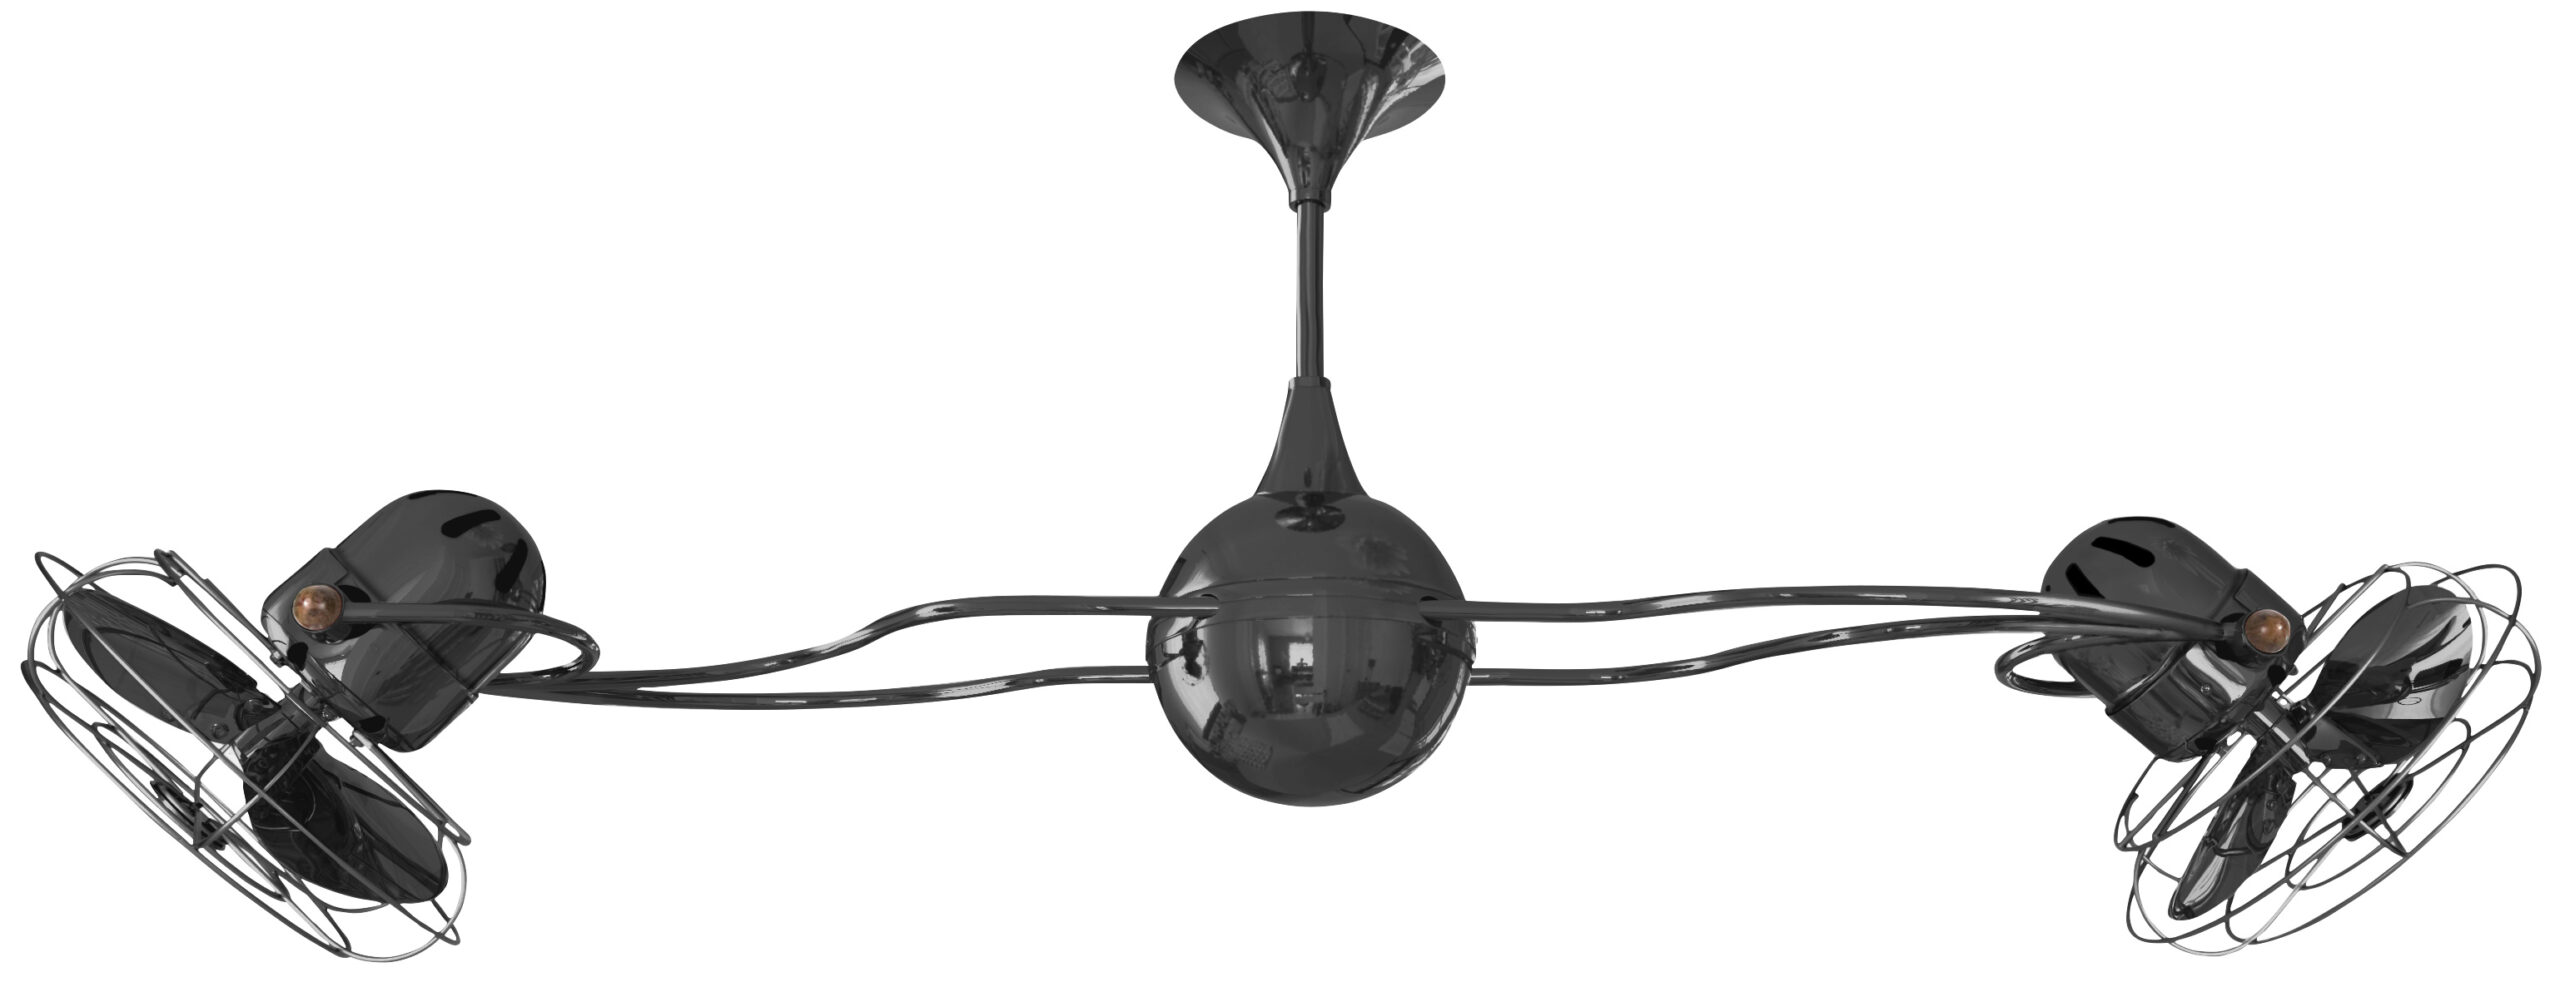 Italo Ventania rotational dual head ceiling fan in Black Nickel finish with Metal blades and decorative cage made by Matthews Fan Company.